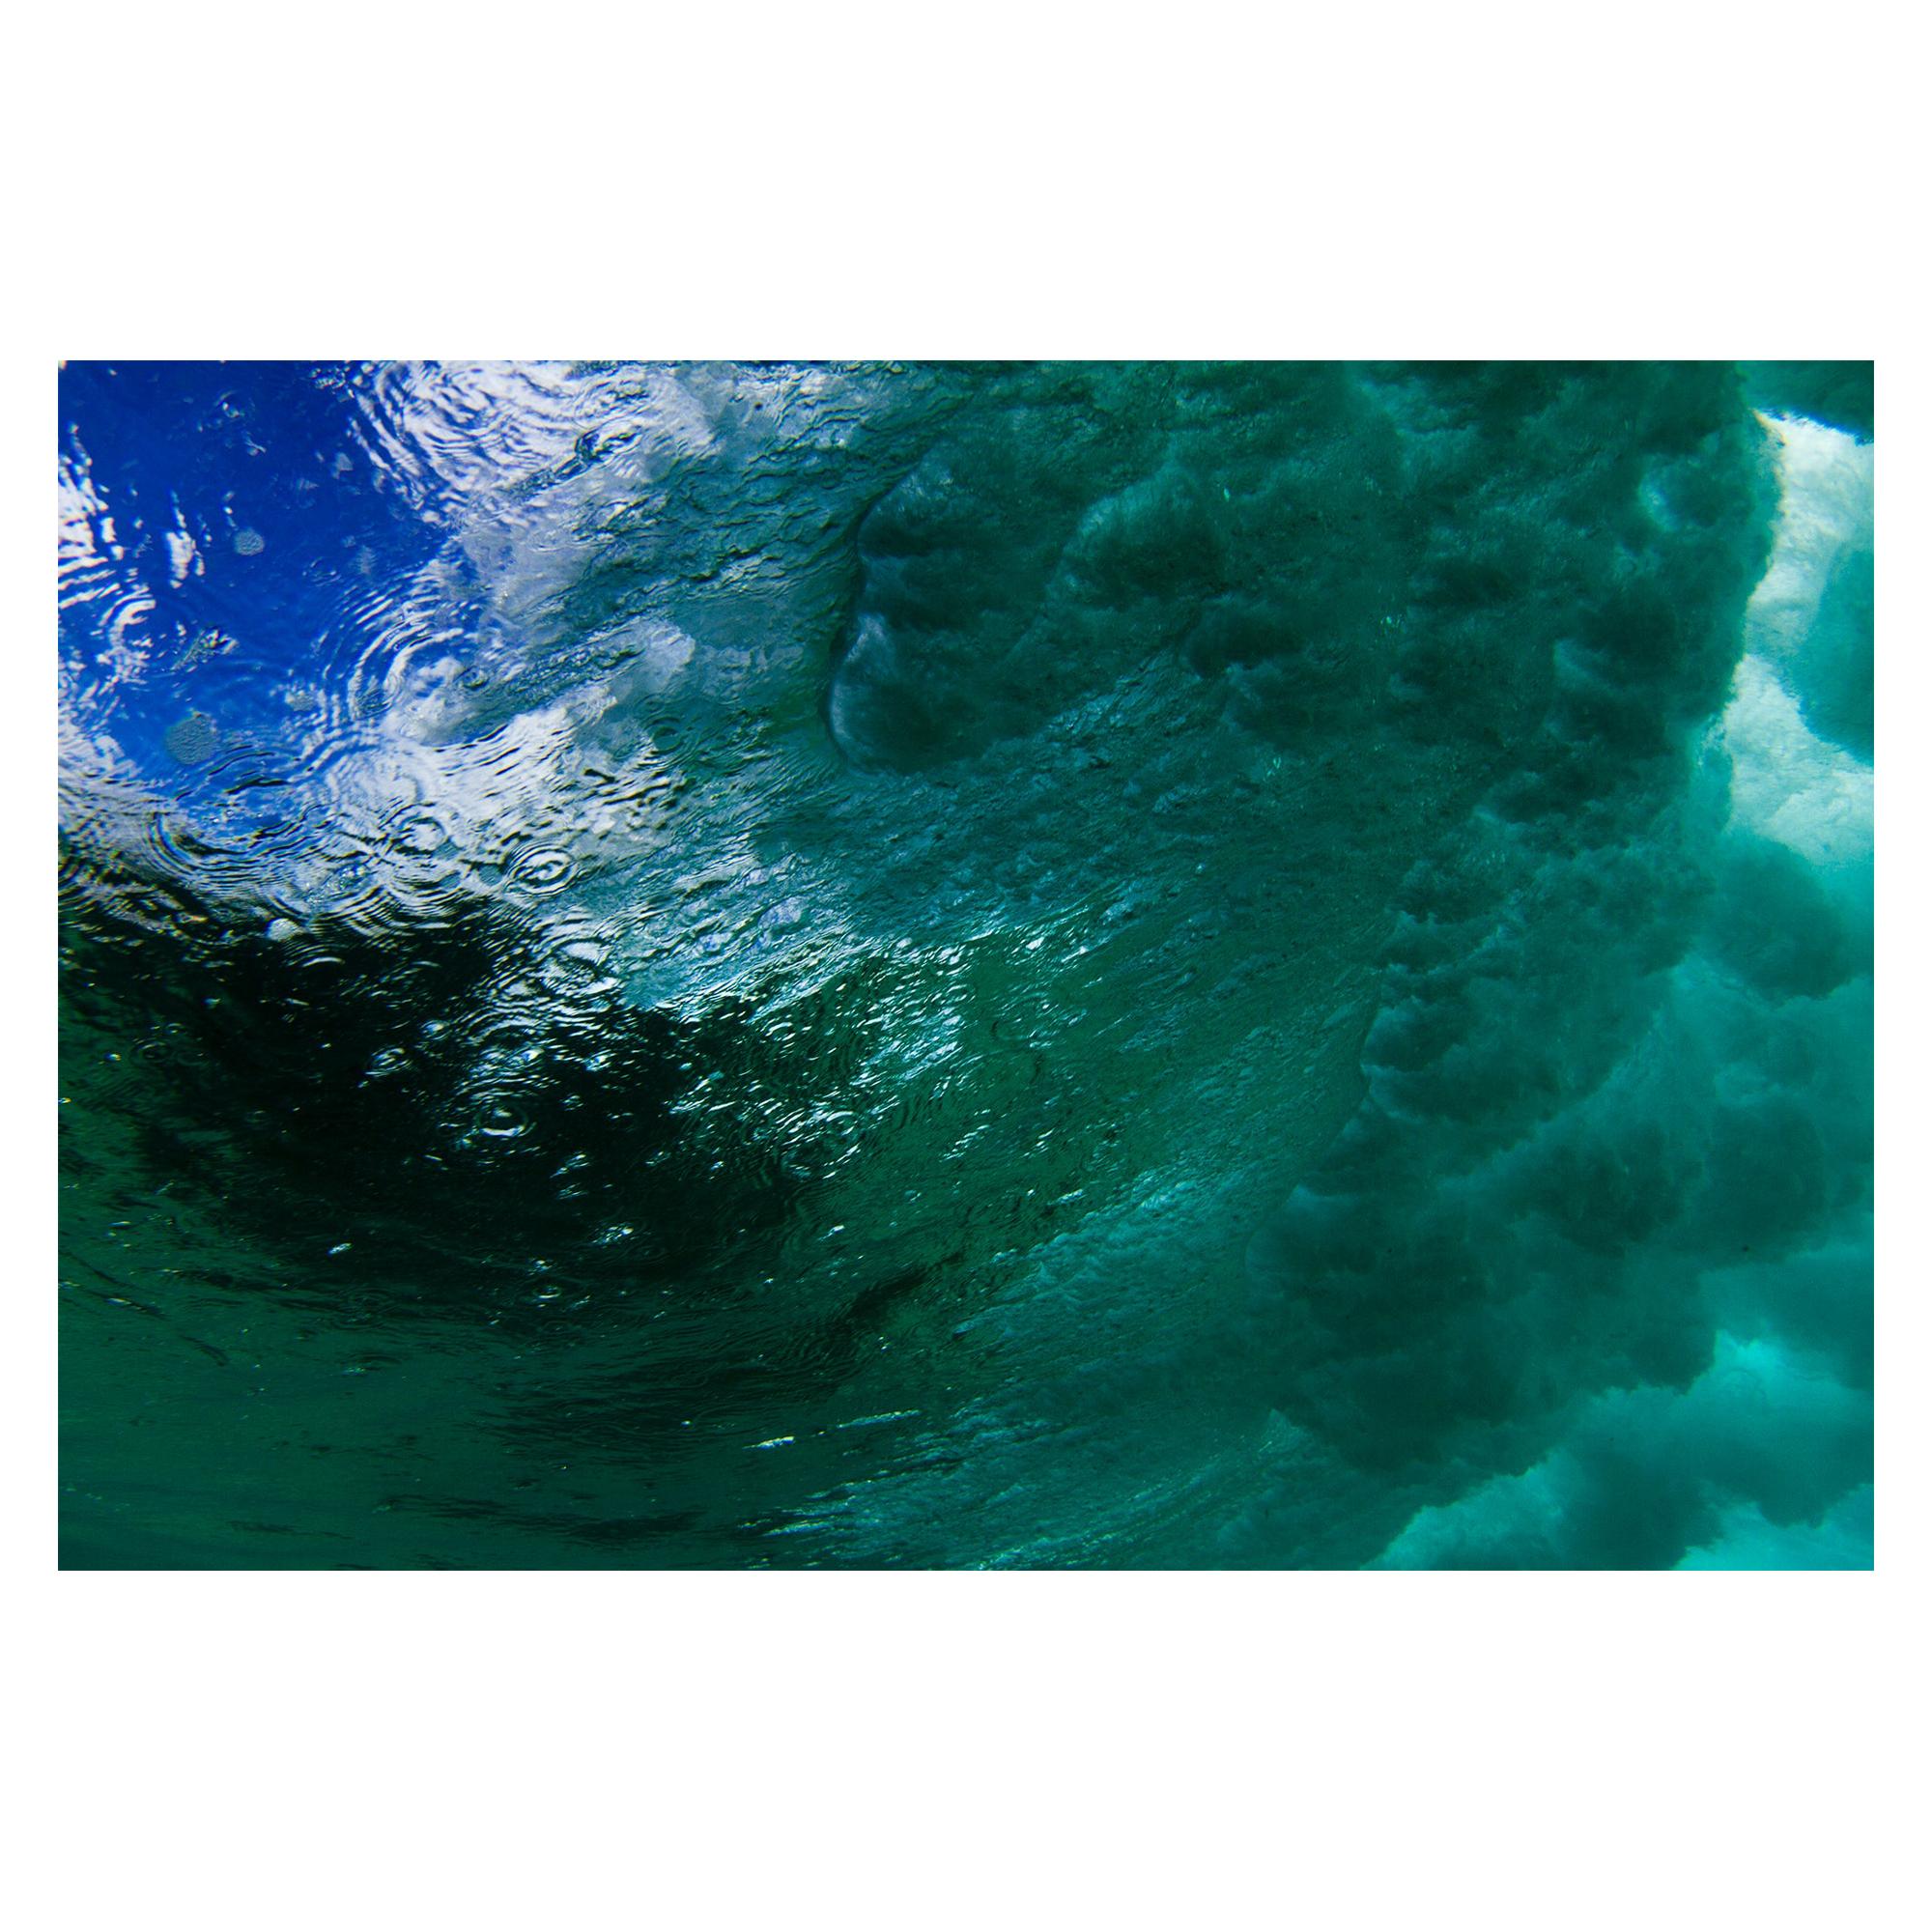 Photography "Waves 3", 2017, by Brazilian Photographer Roberta Borges For Sale